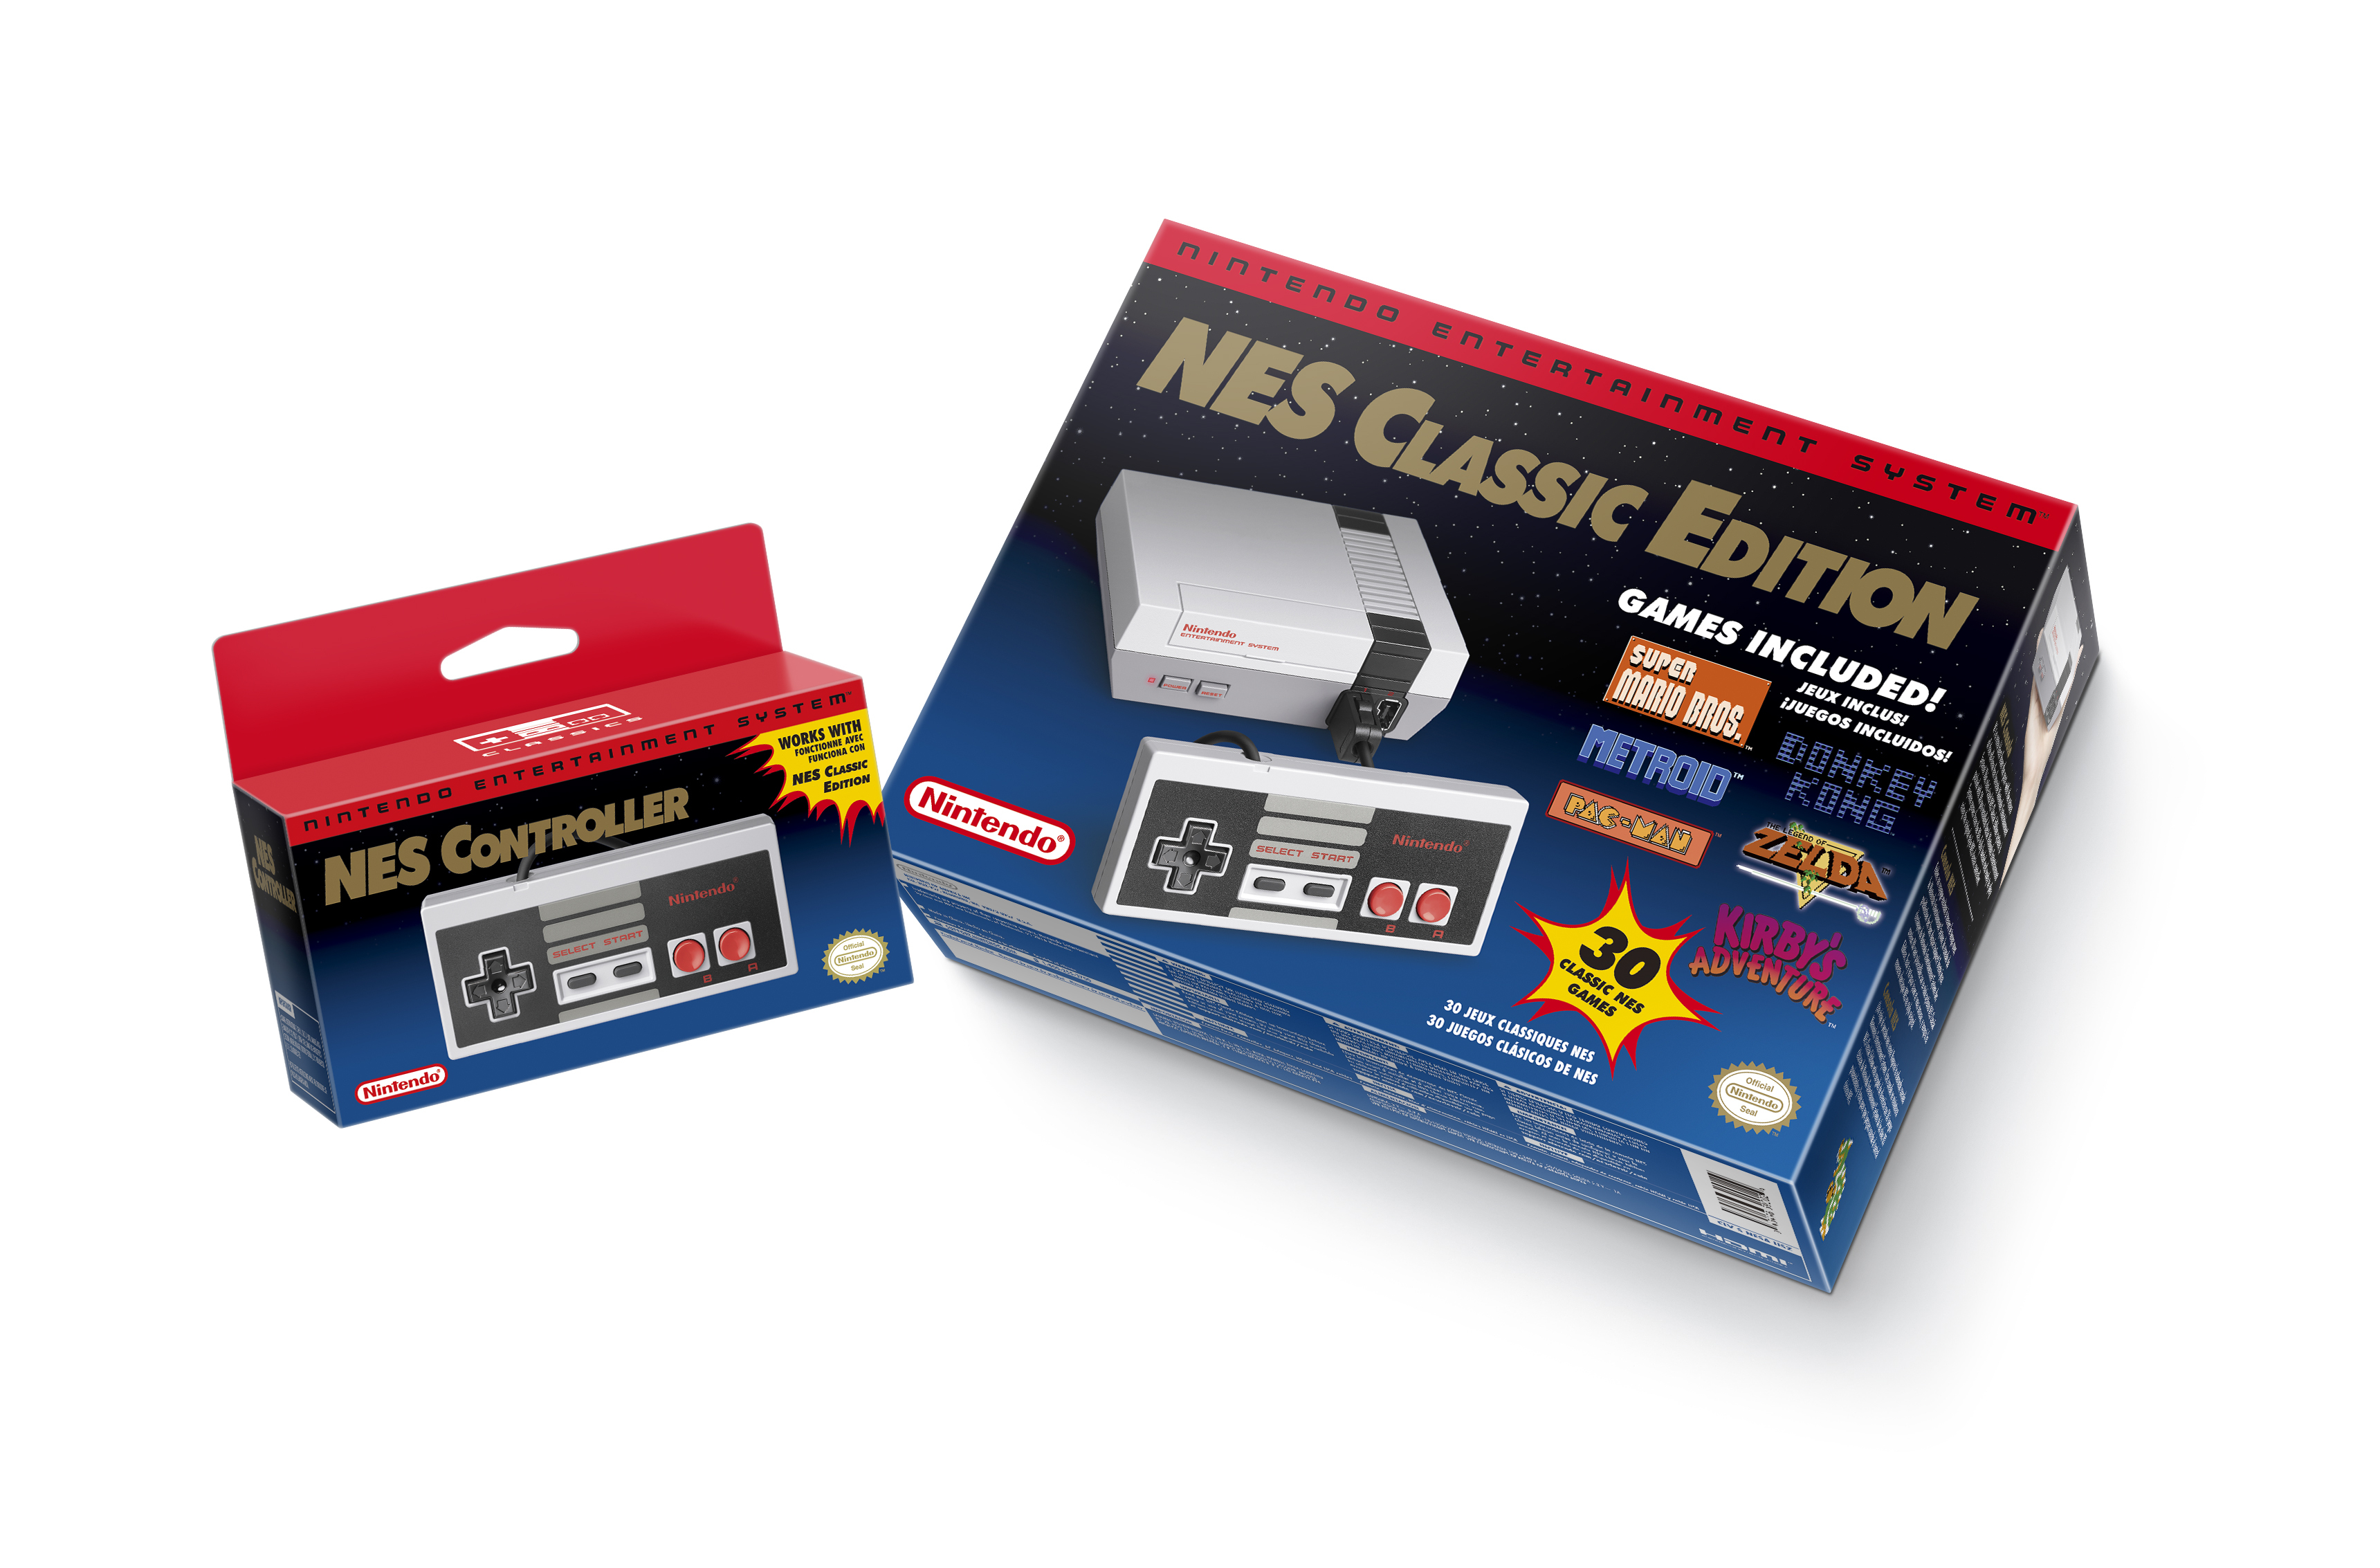 nes classic collection